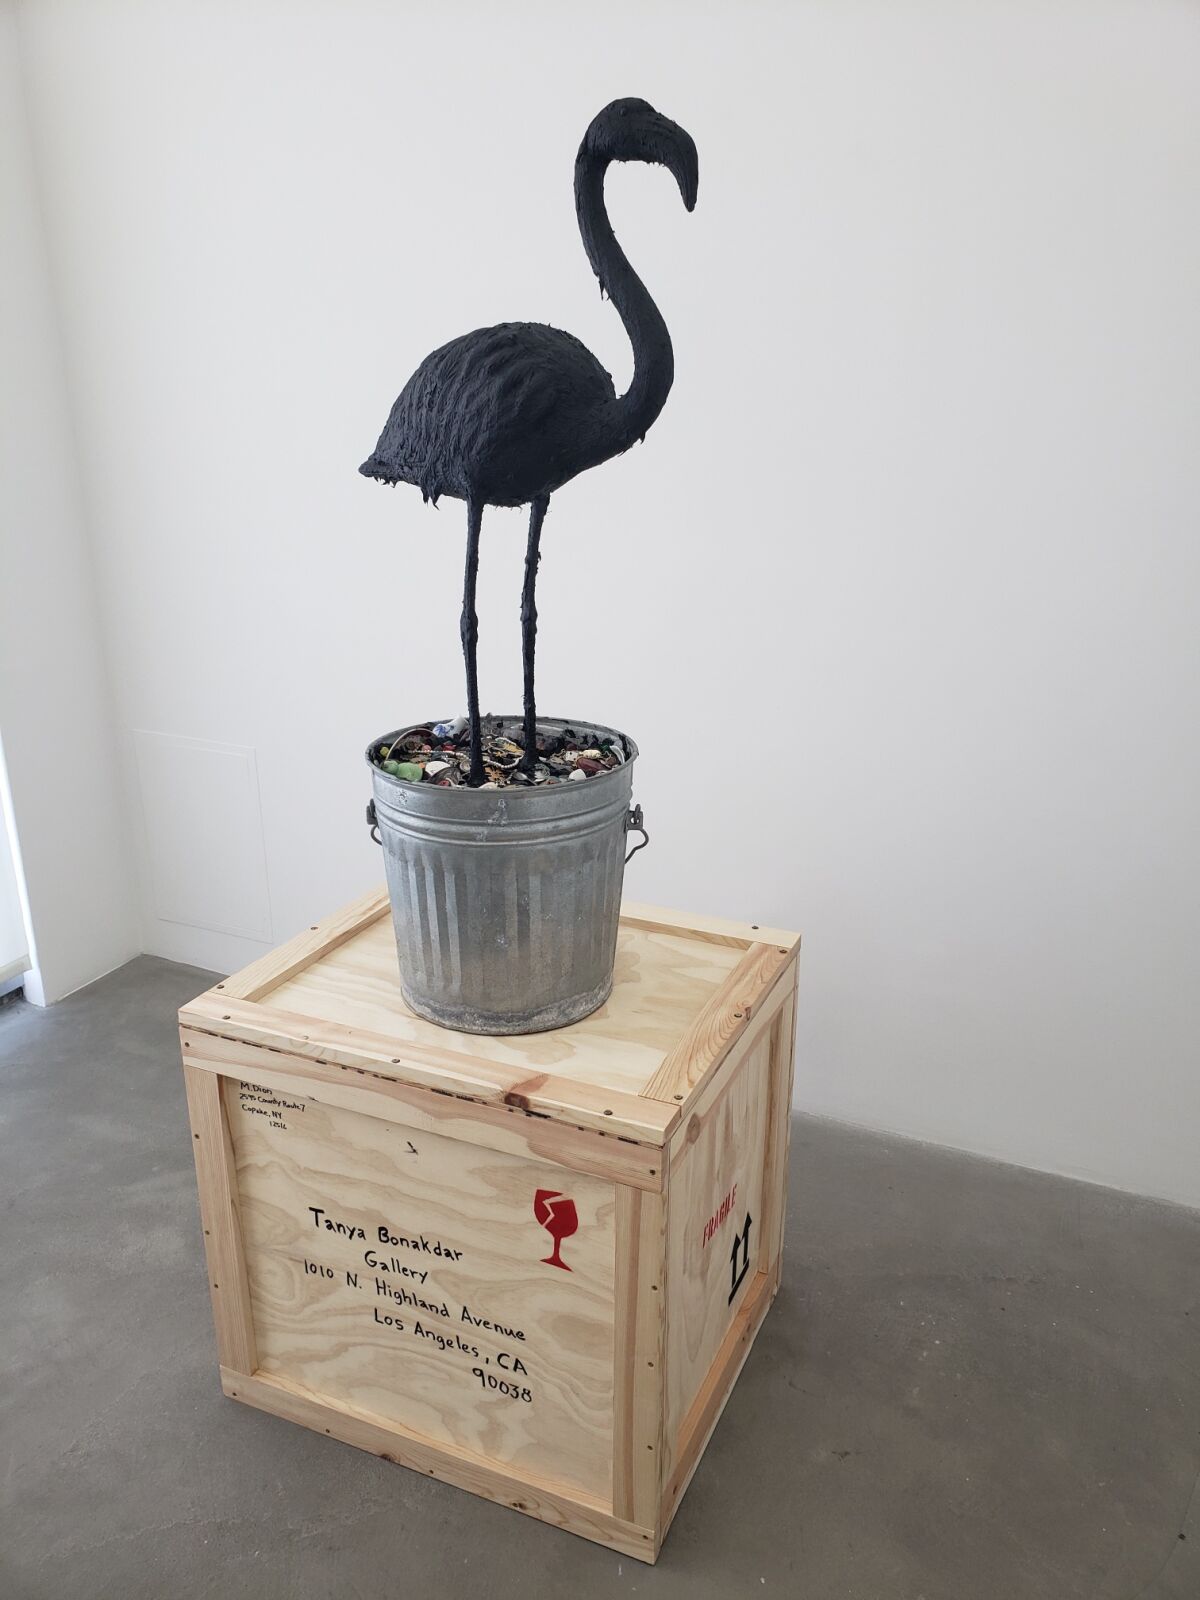 A flamingo in a pot on a wood box